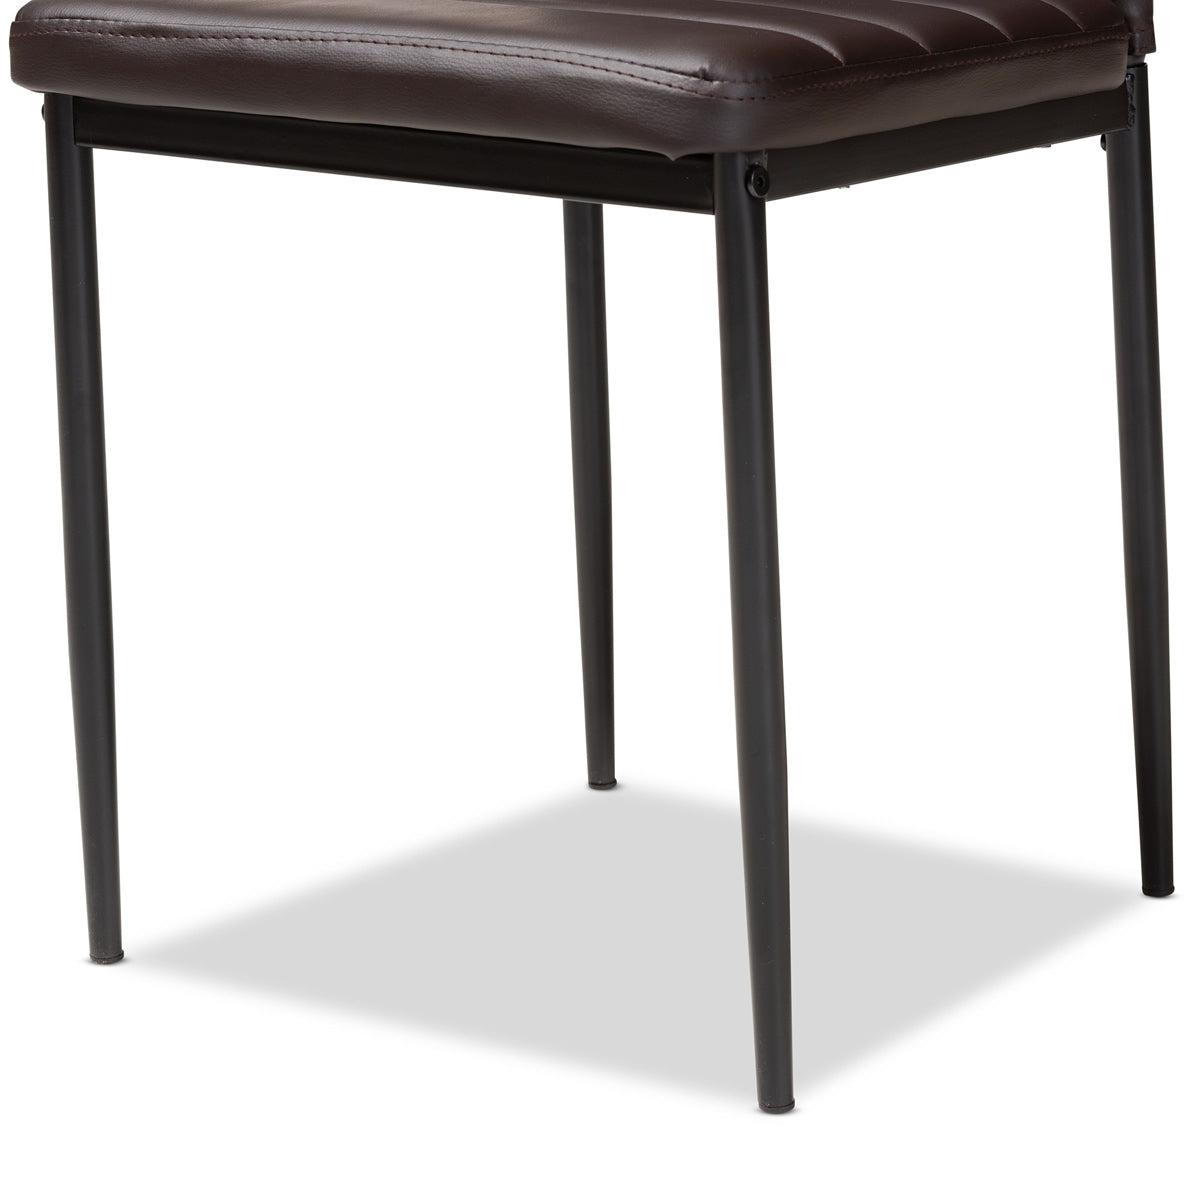 Baxton Studio Armand Modern and Contemporary Brown Faux Leather Upholstered Dining Chair (Set of 4) Baxton Studio-dining chair-Minimal And Modern - 2